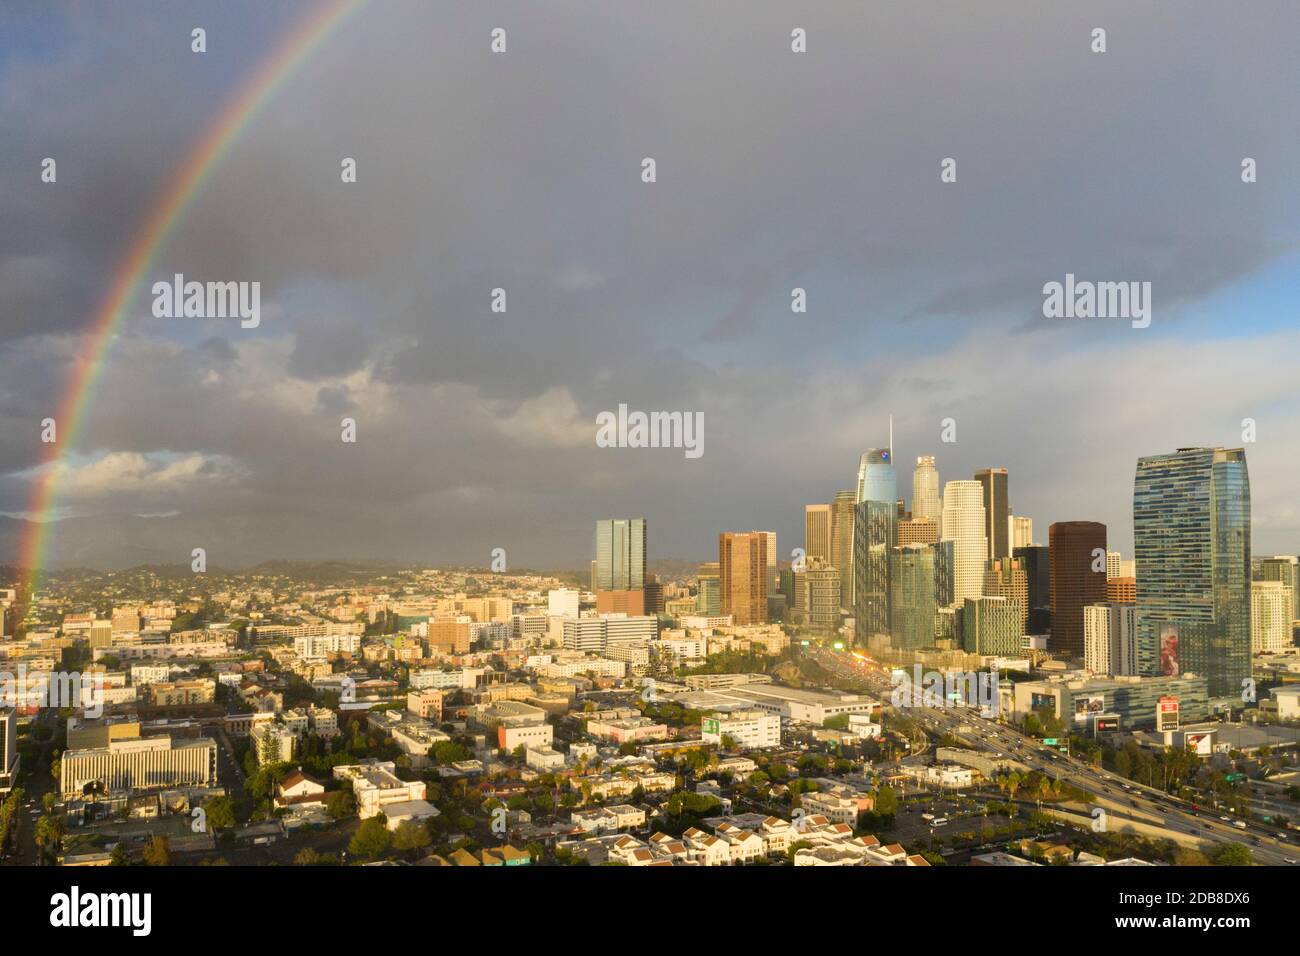 Rainbow over downtown Los Angeles and Westlake neighborhood after a storm Stock Photo